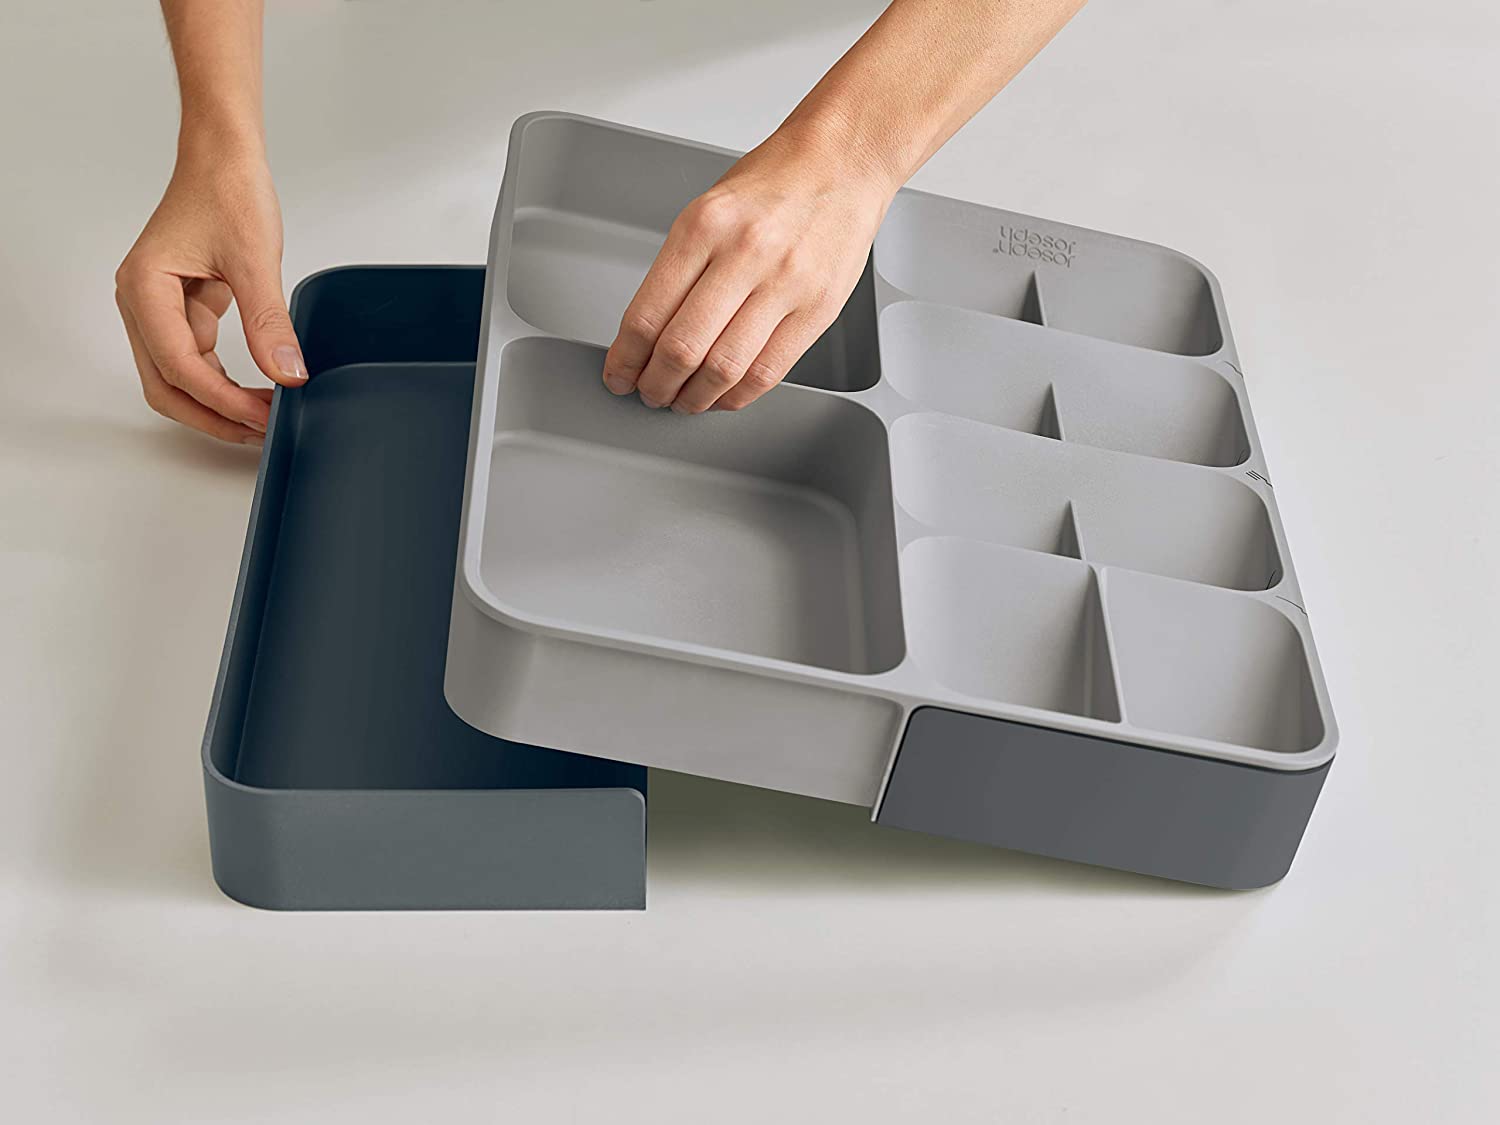 2 Layer folding cutlery holder - Grey Color